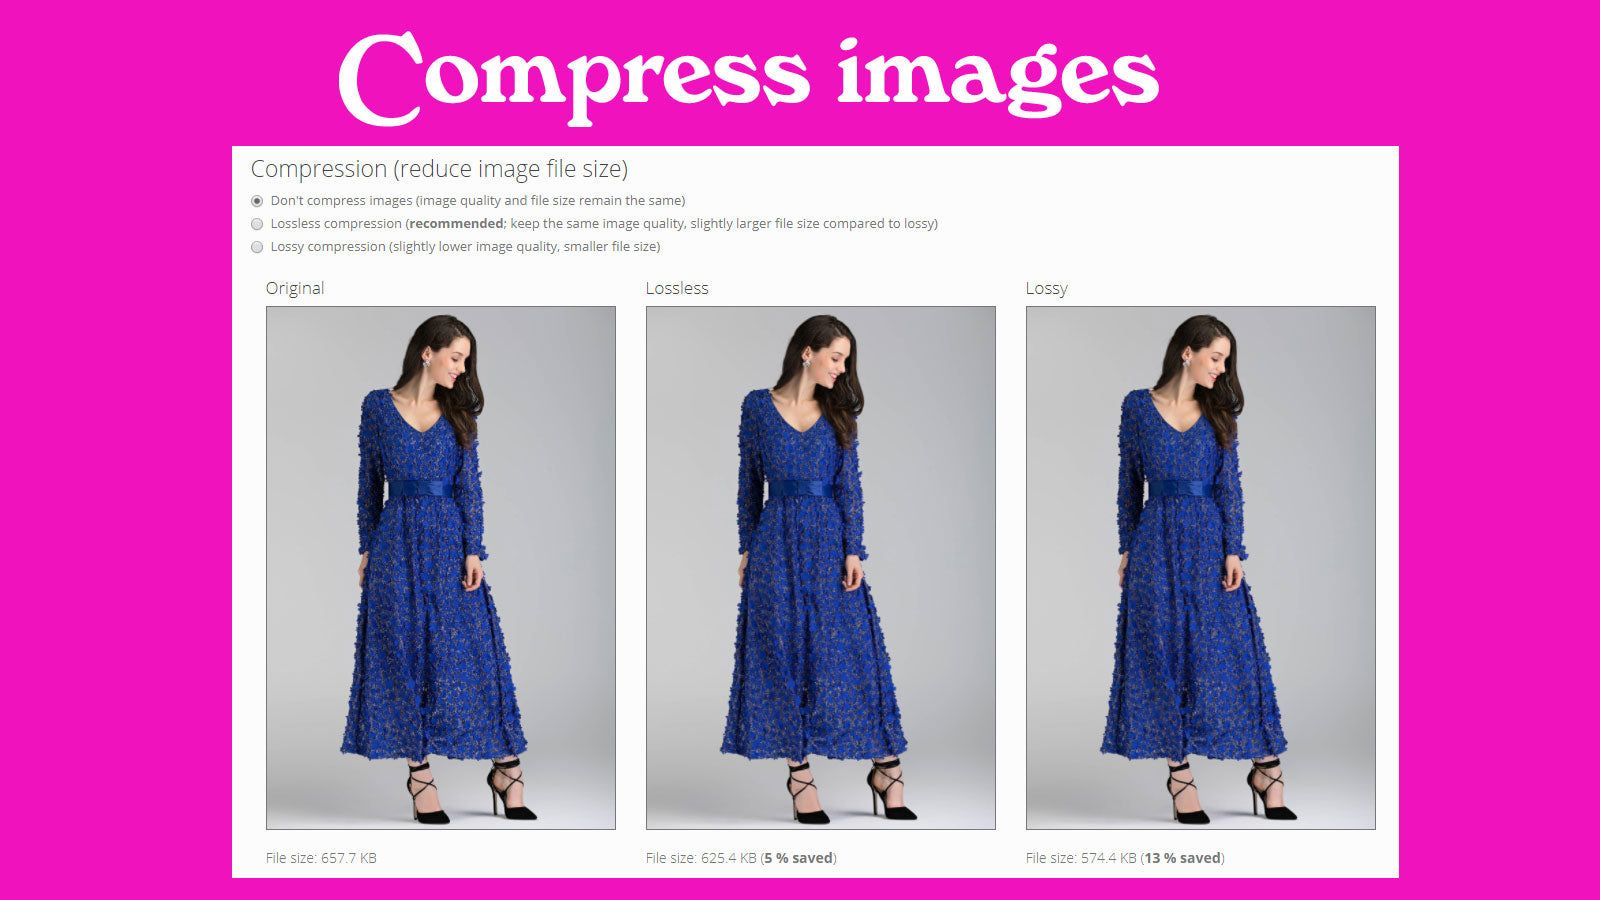 Compress images and reduce file size